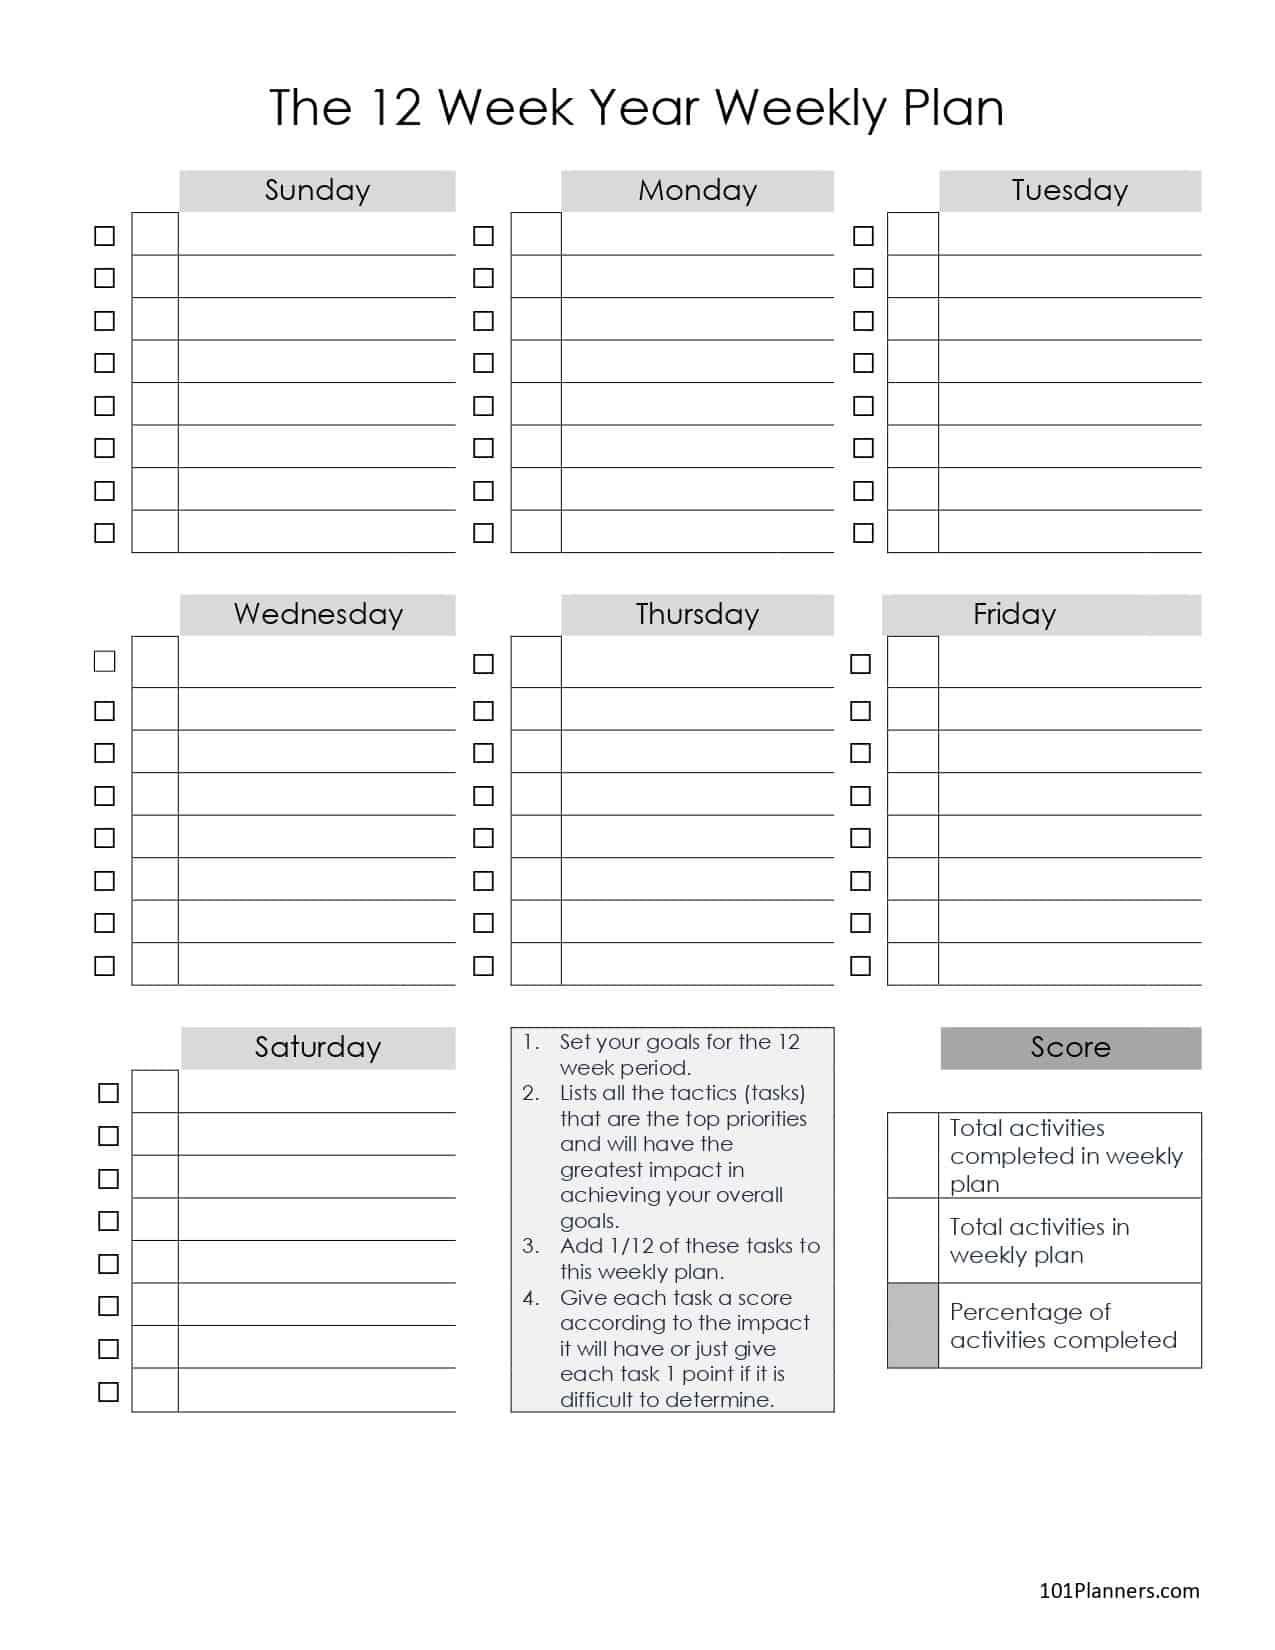 The 12 Week Year Planner And Templates FREE Download